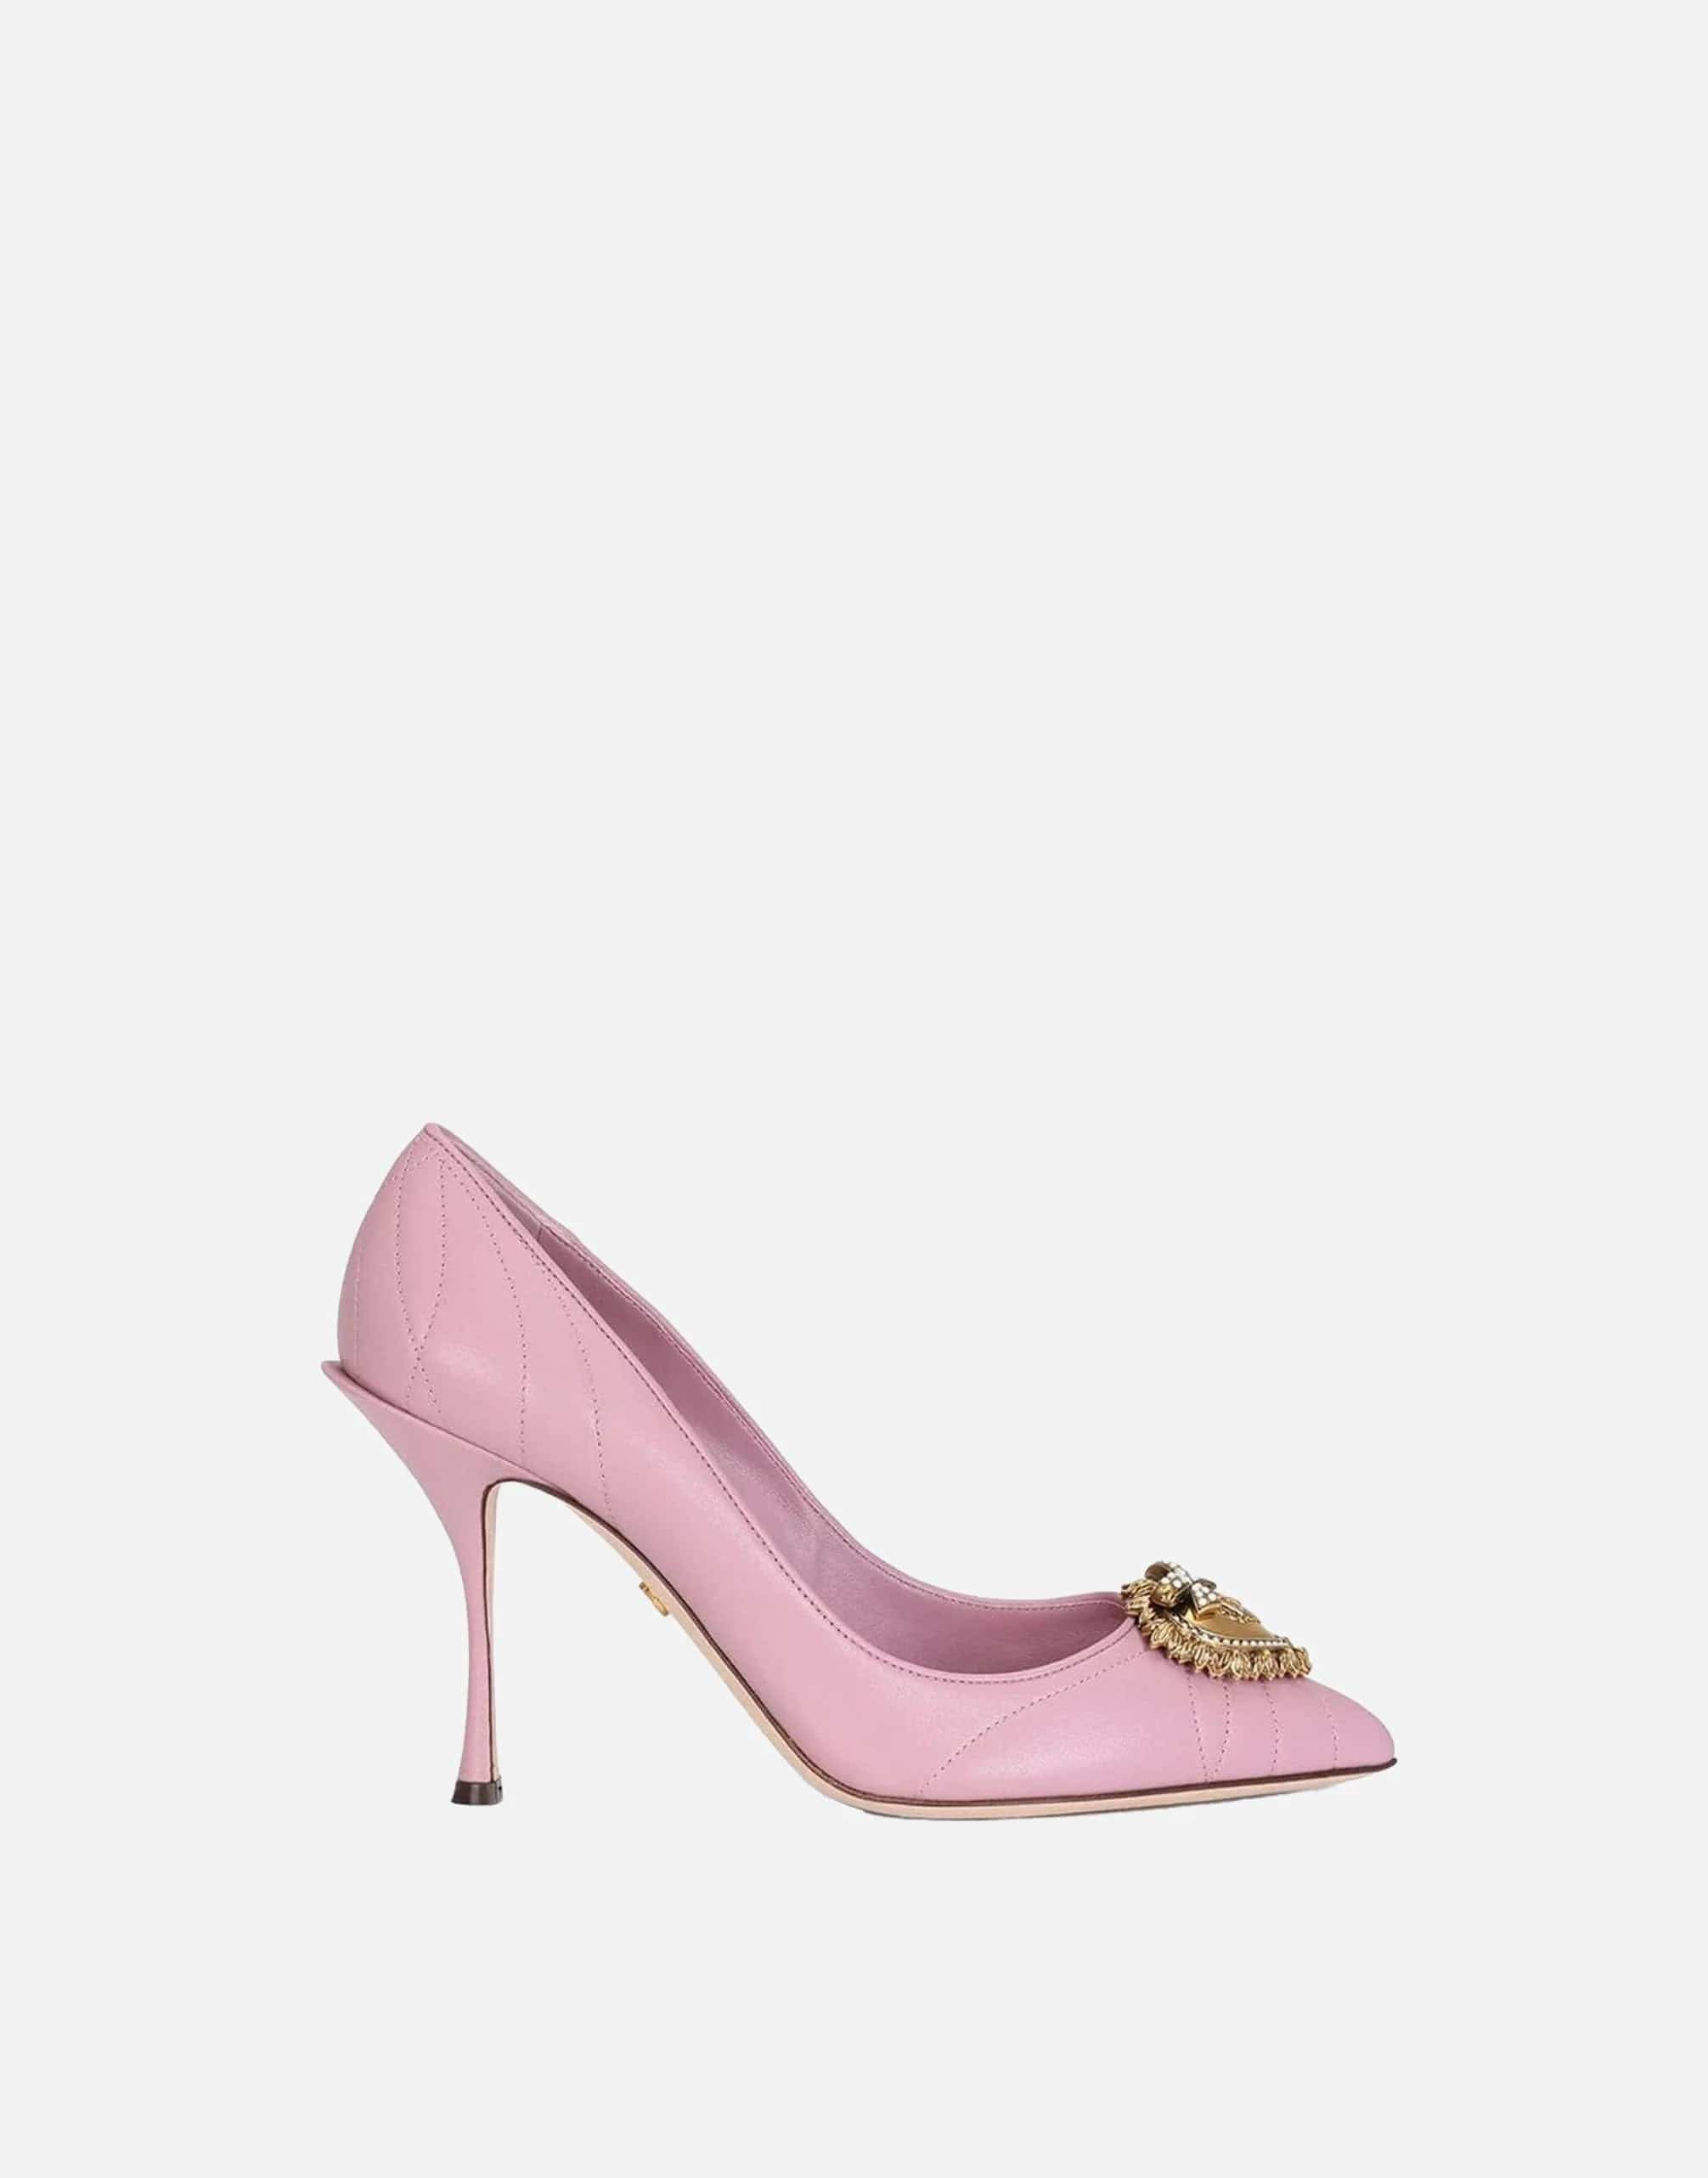 Quilted Nappa Devotion Pumps